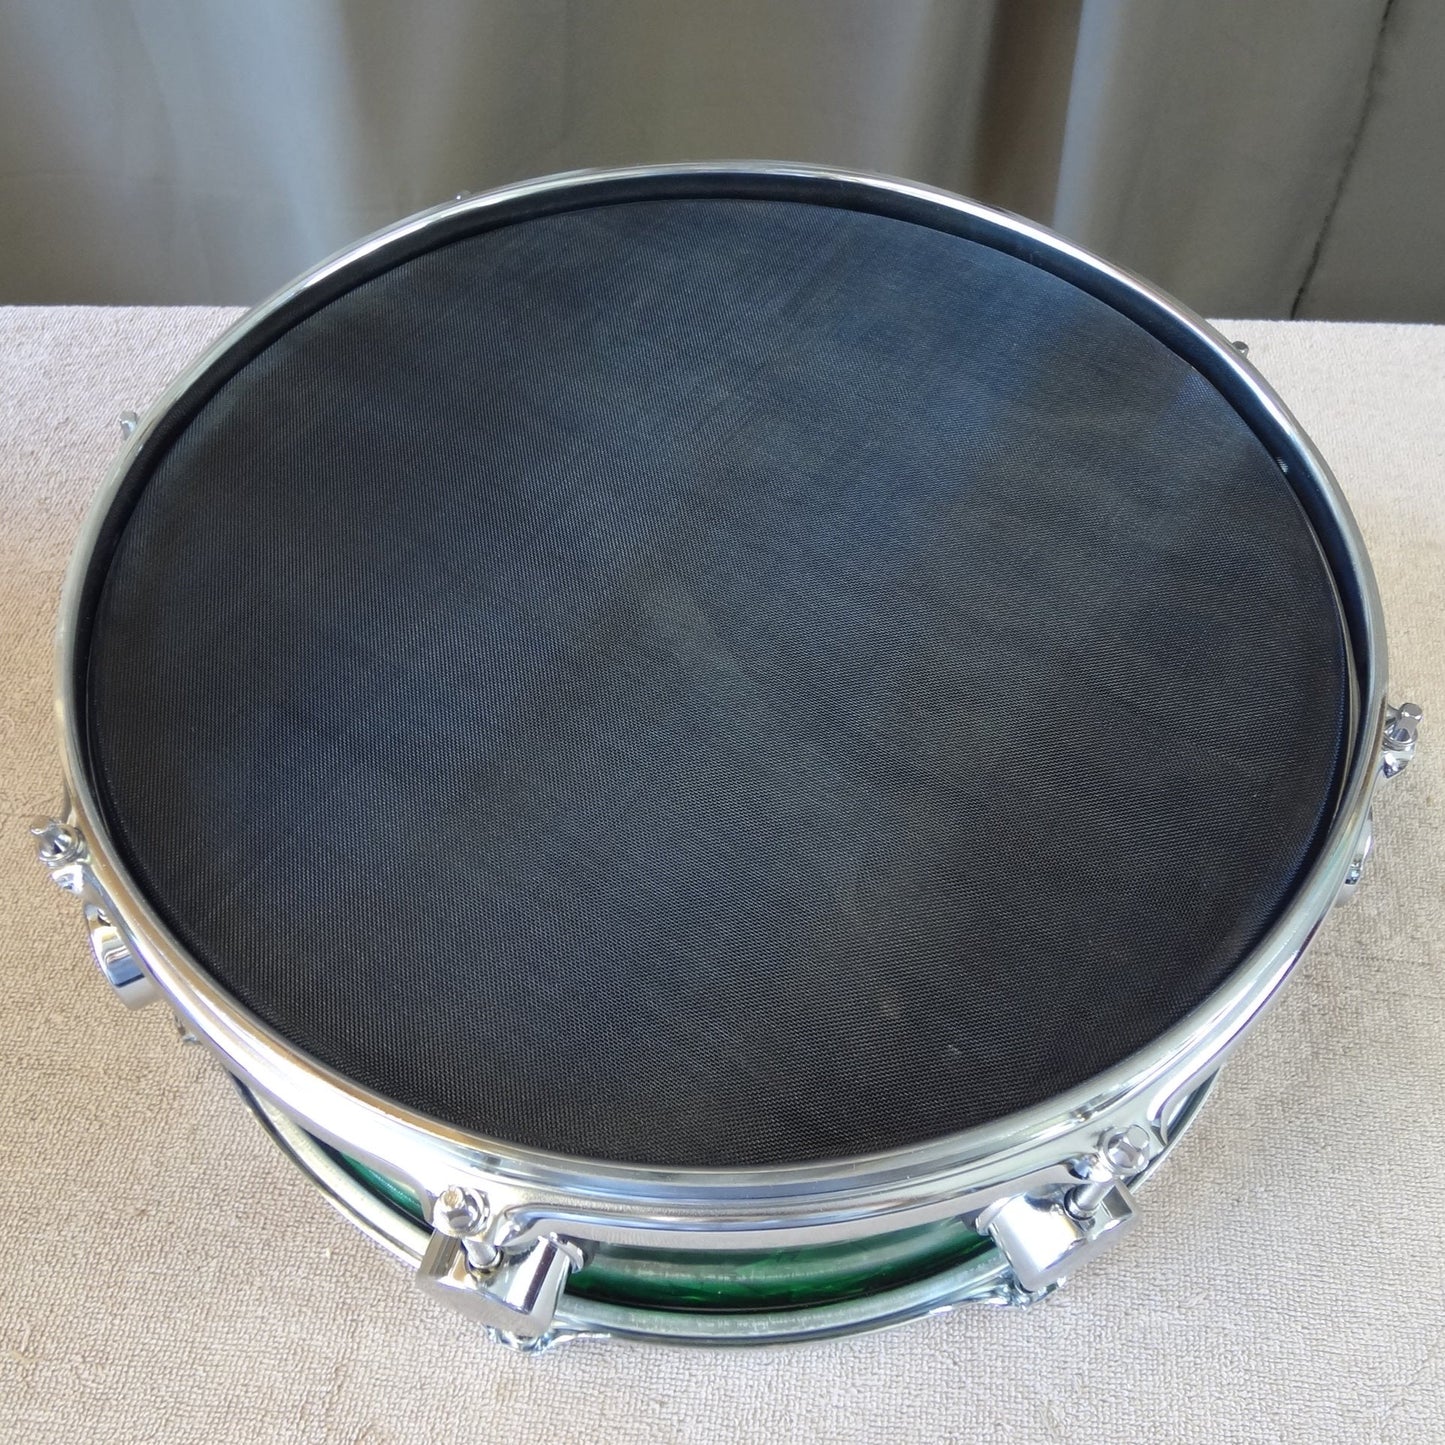 New 14 Inch Custom Electronic Snare Drum - Green Pearl